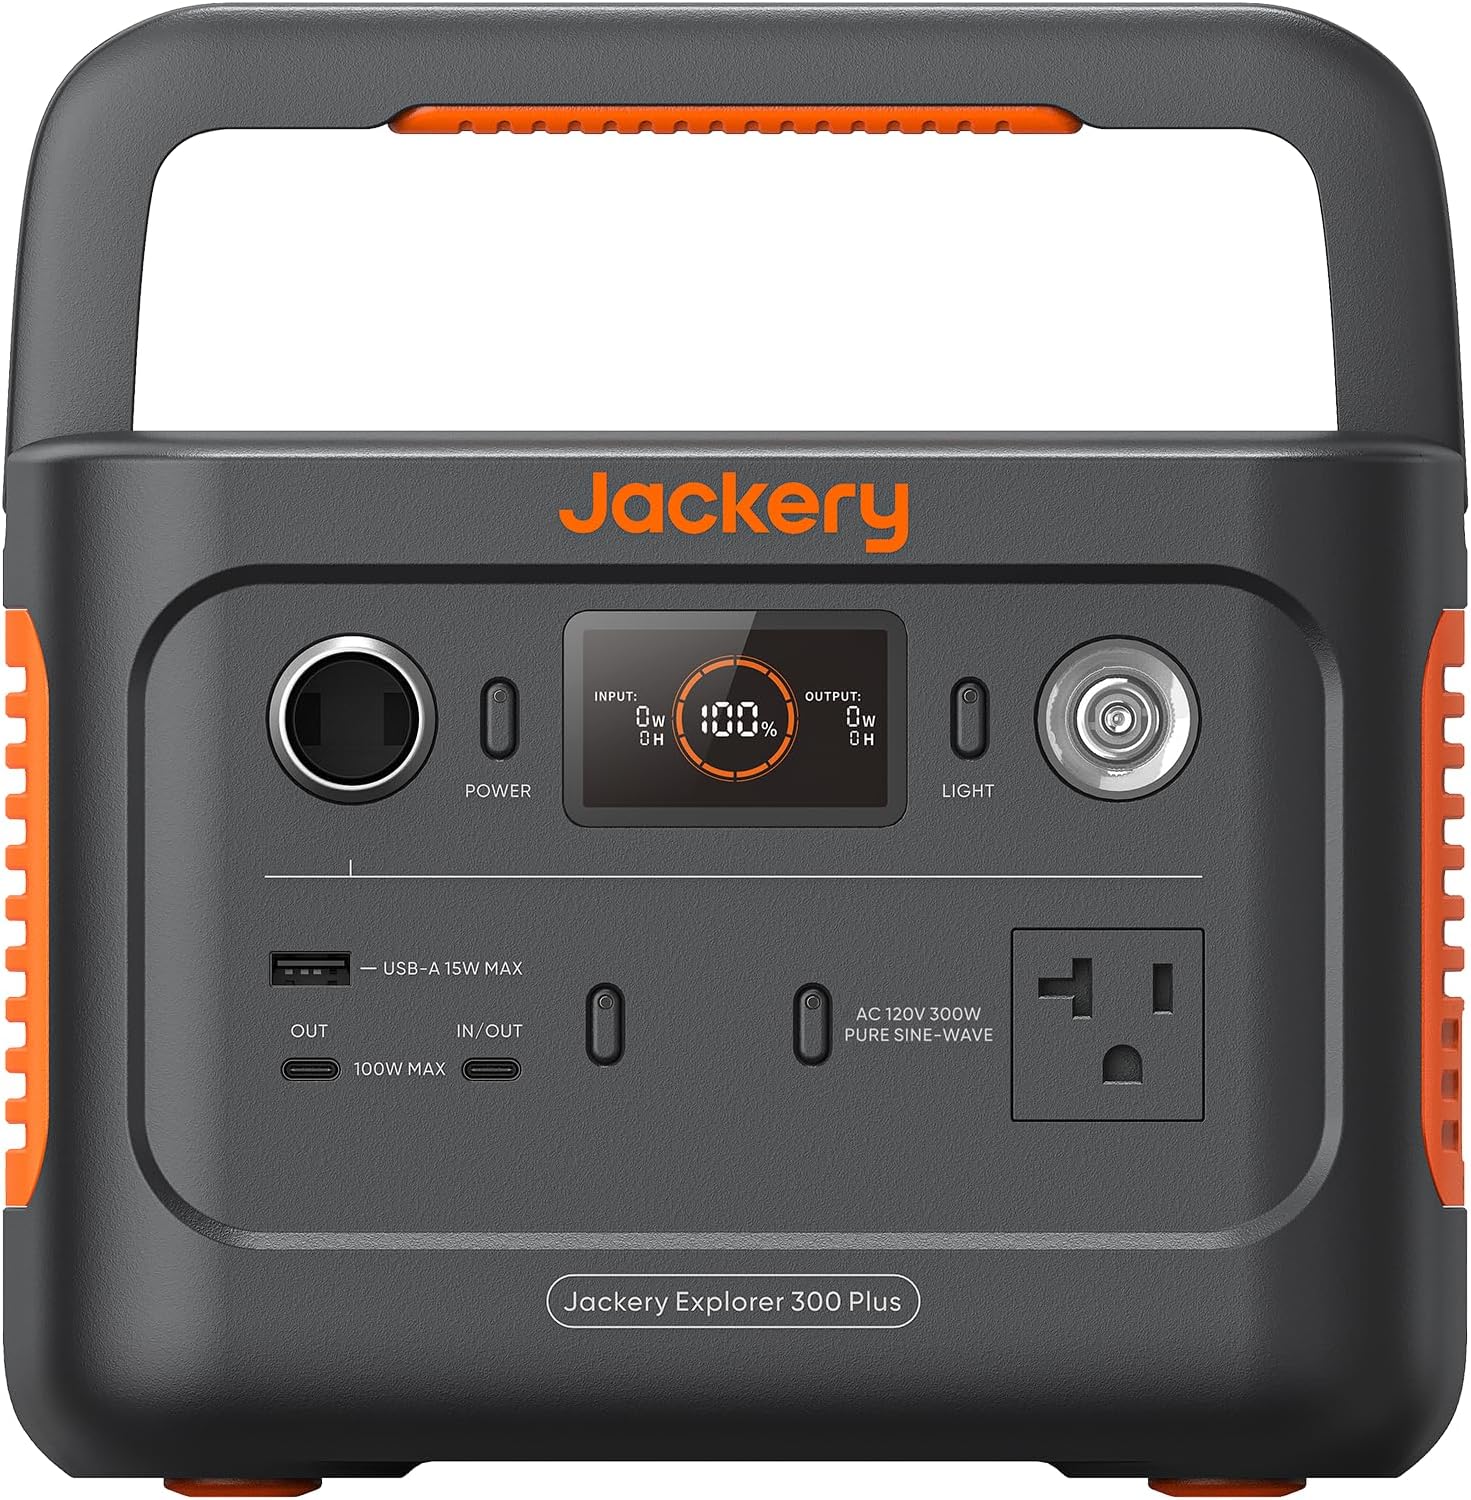 Jackery Explorer 300 Plus Portable Power Station, 288Wh Backup LiFePO4 Battery, 300W AC Outlet, 3.75 KG Solar Generator (Solar Panel Not Included) for RV, Outdoors, Camping, Traveling, and Emergencies (E300Plus)